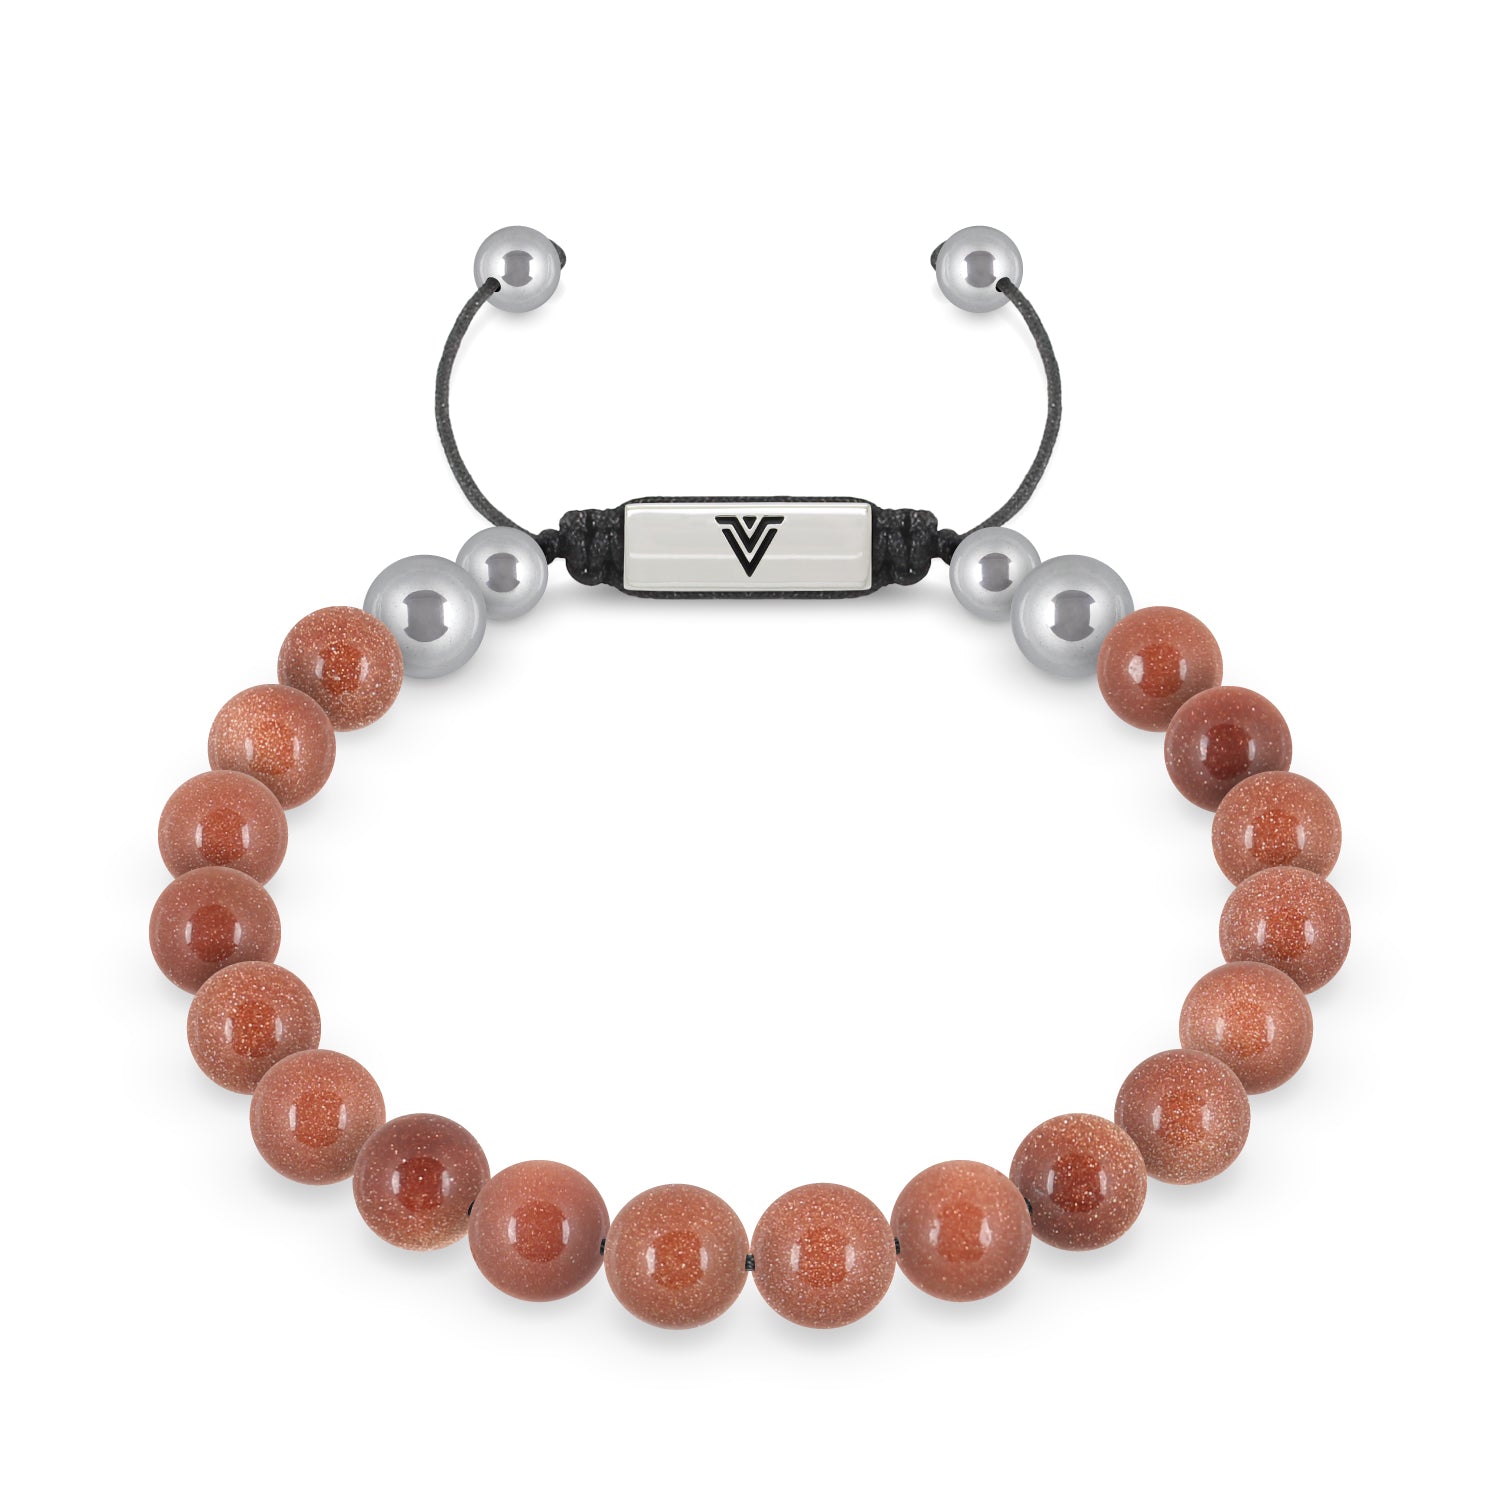 Front view of an 8mm Red Goldstone beaded shamballa bracelet with silver stainless steel logo bead made by Voltlin